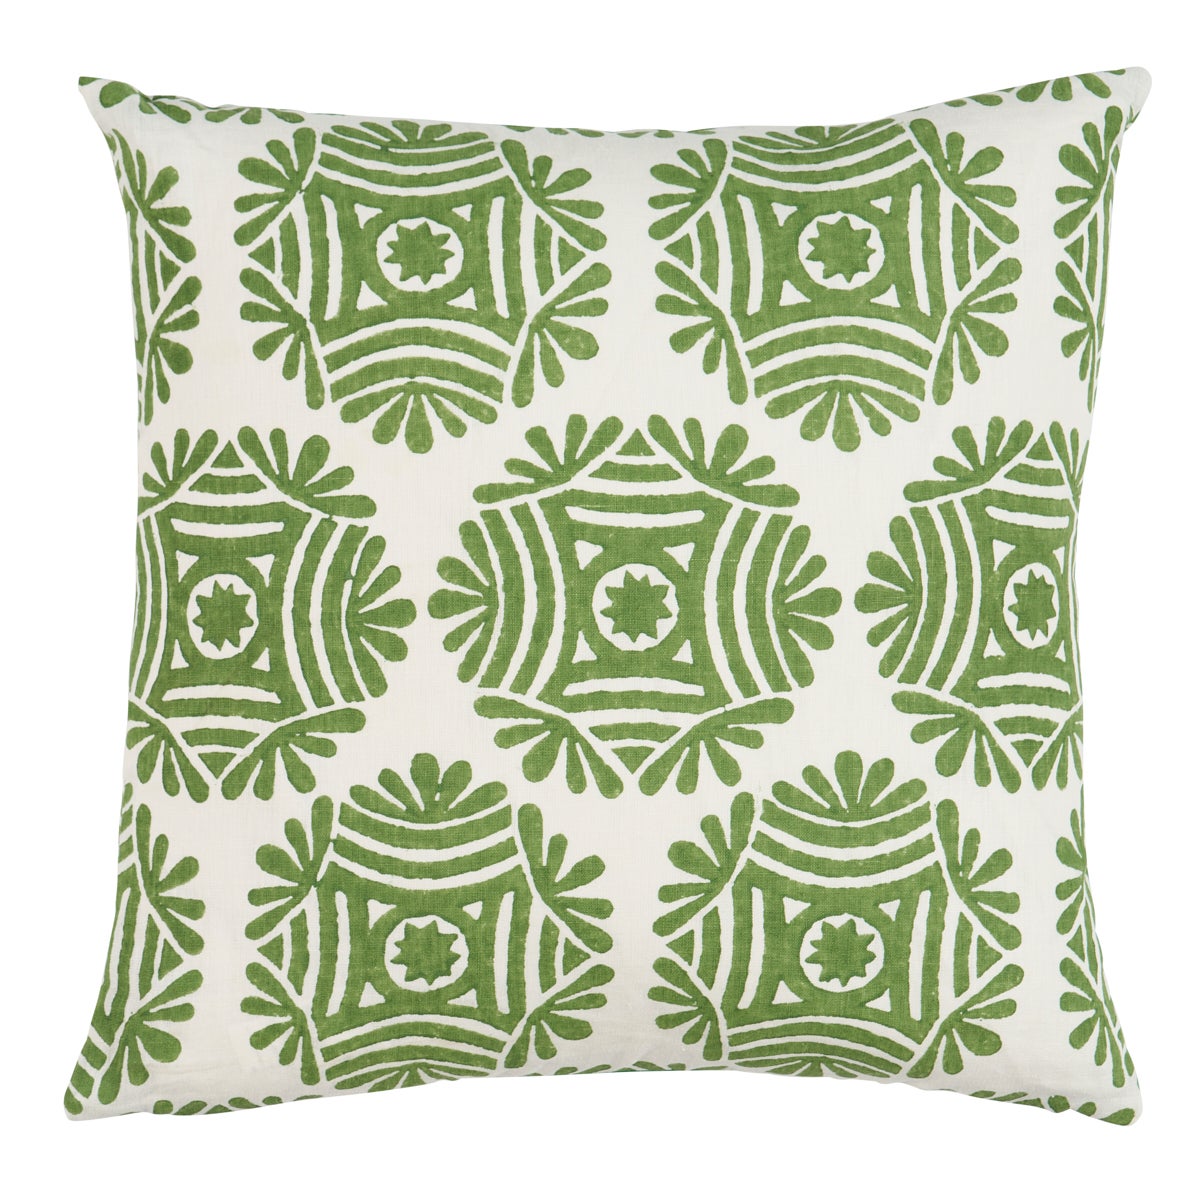 Gilded Star Block Print Pillow in Green, 20" For Sale